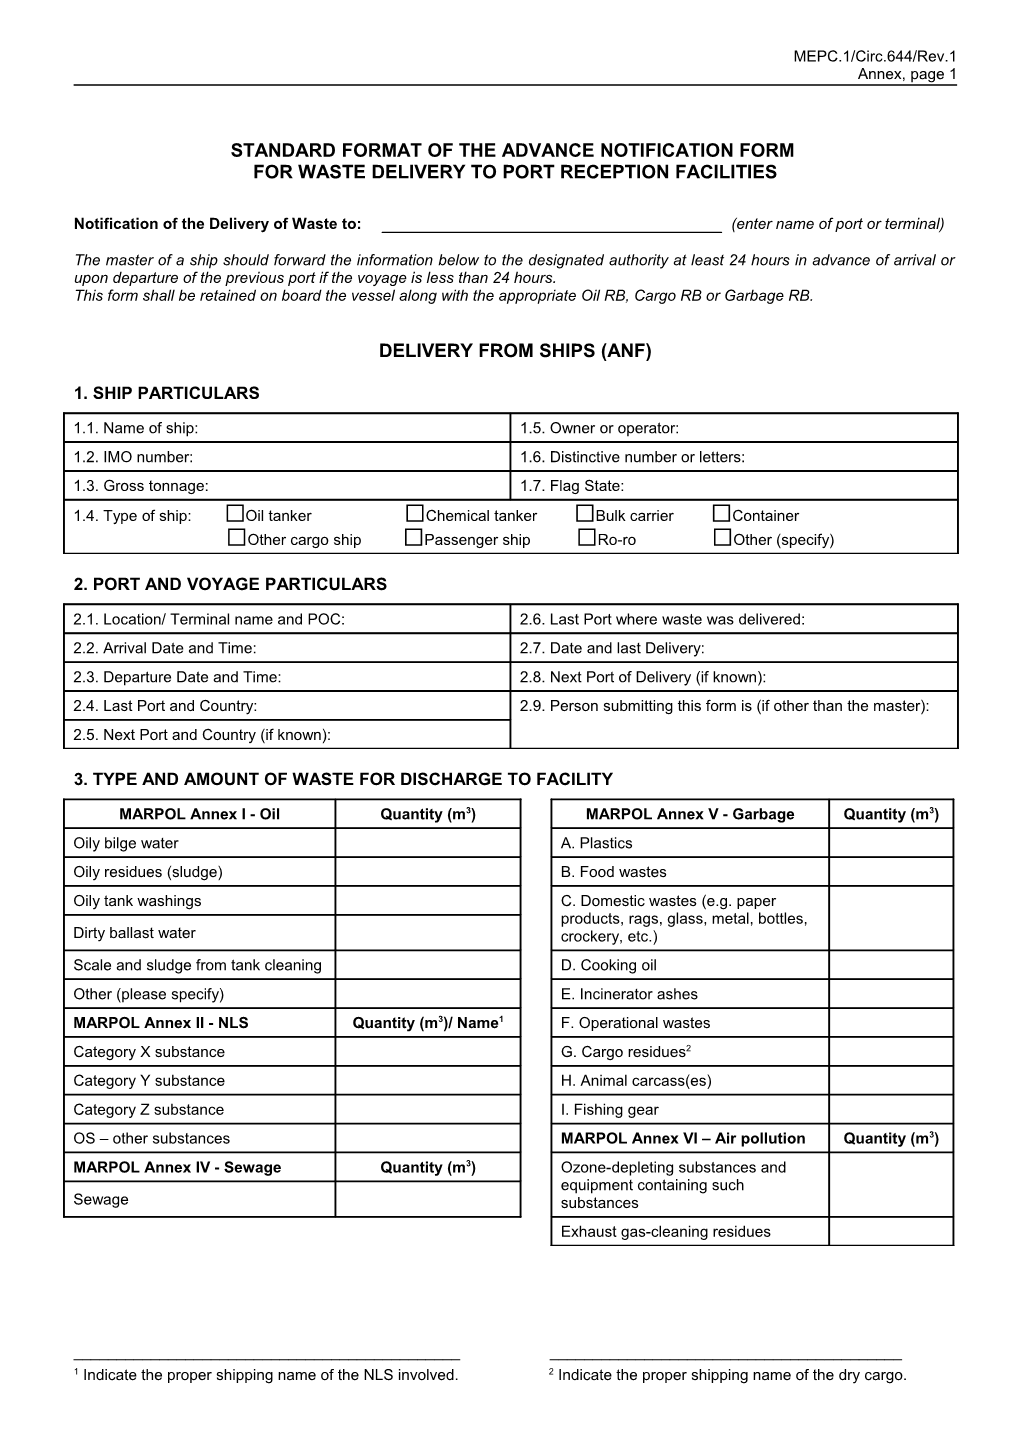 Standard Format of the Advance Notification Form